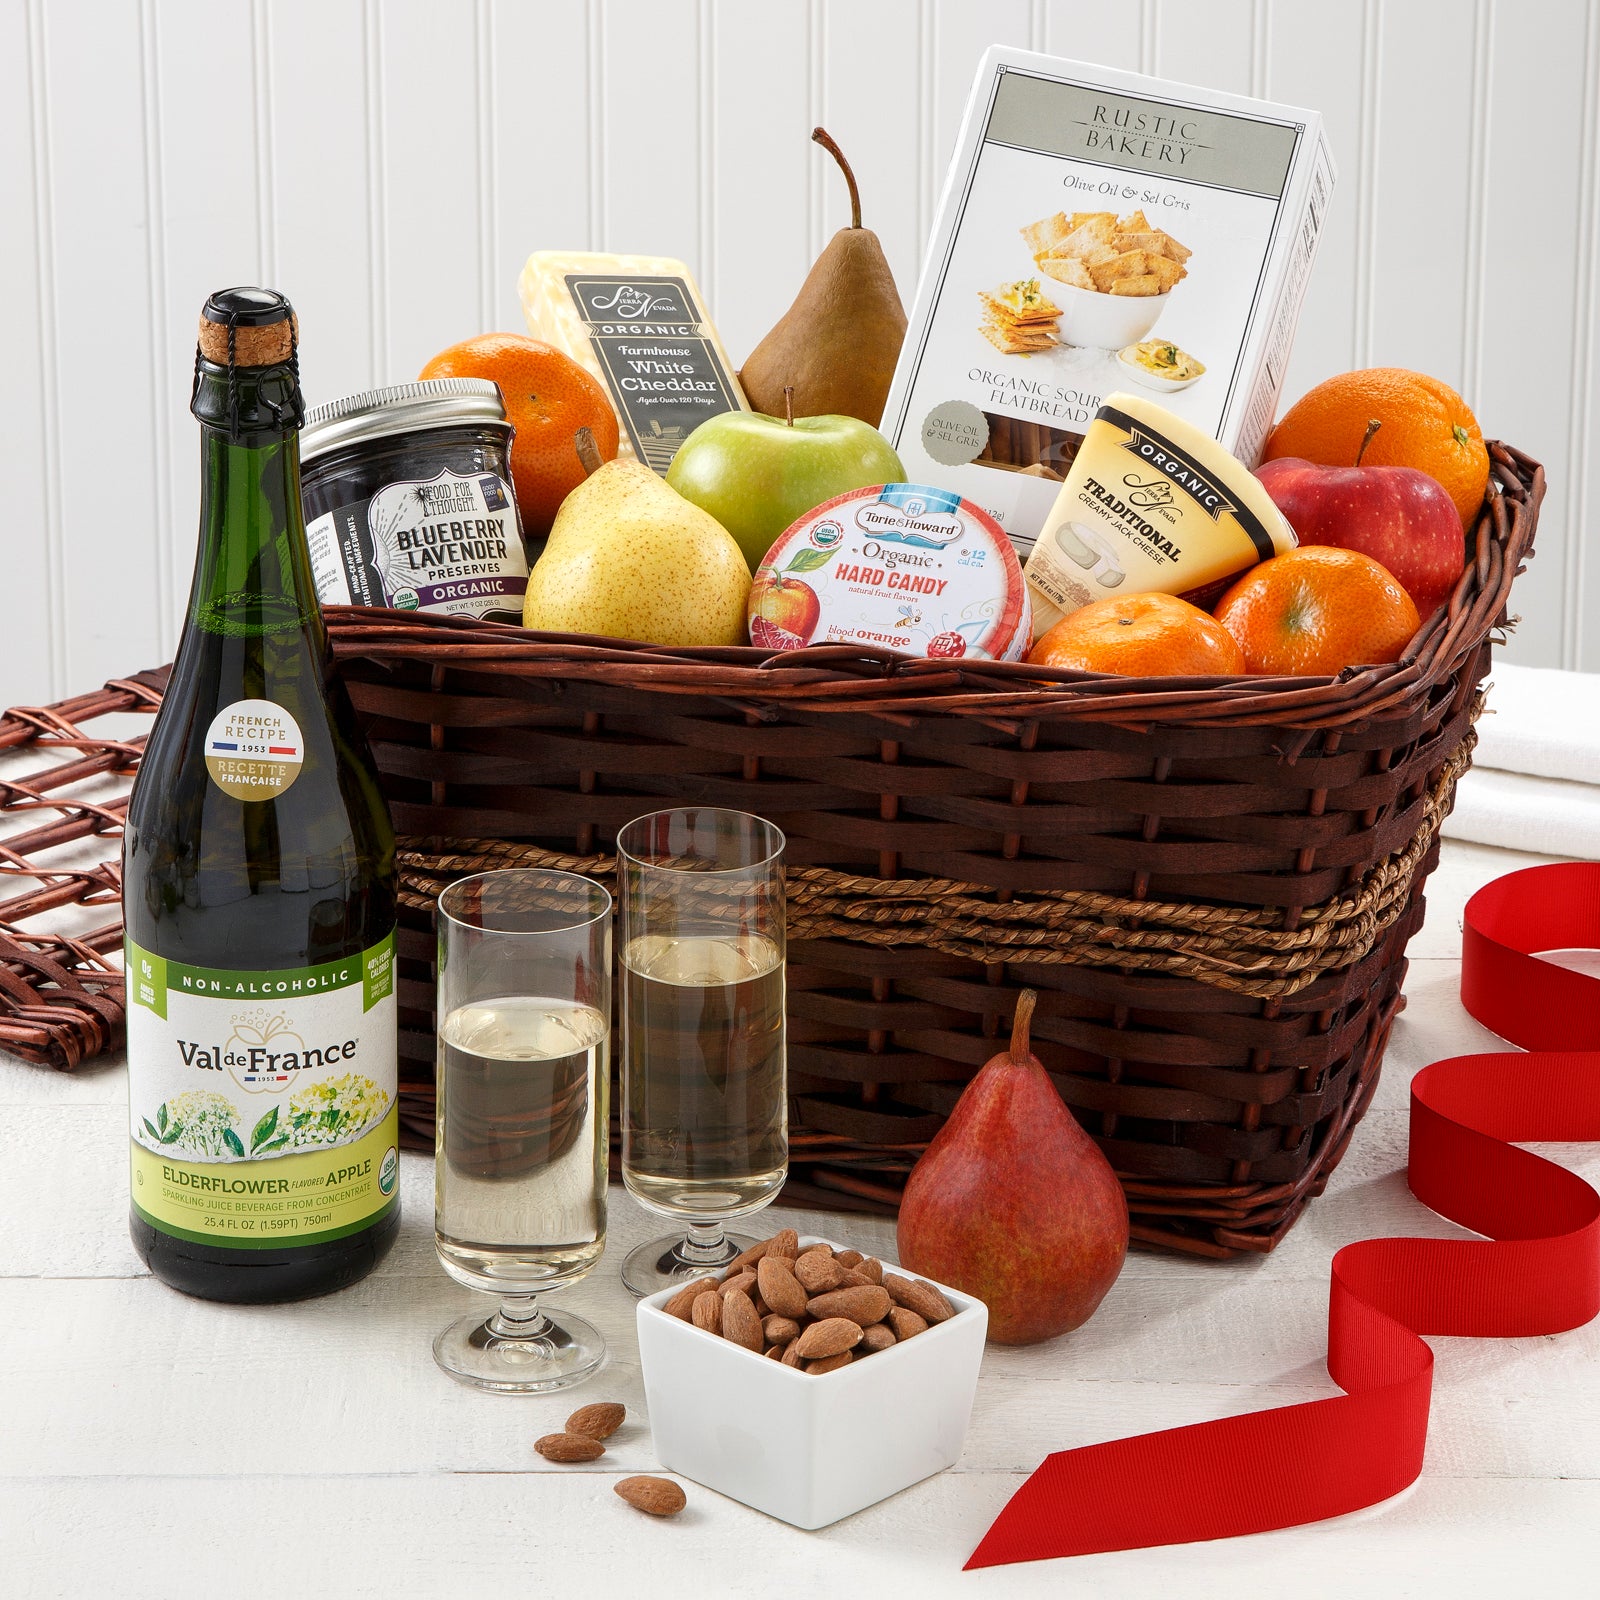 A brown gift basket filled with an assortment of fruit and snacks